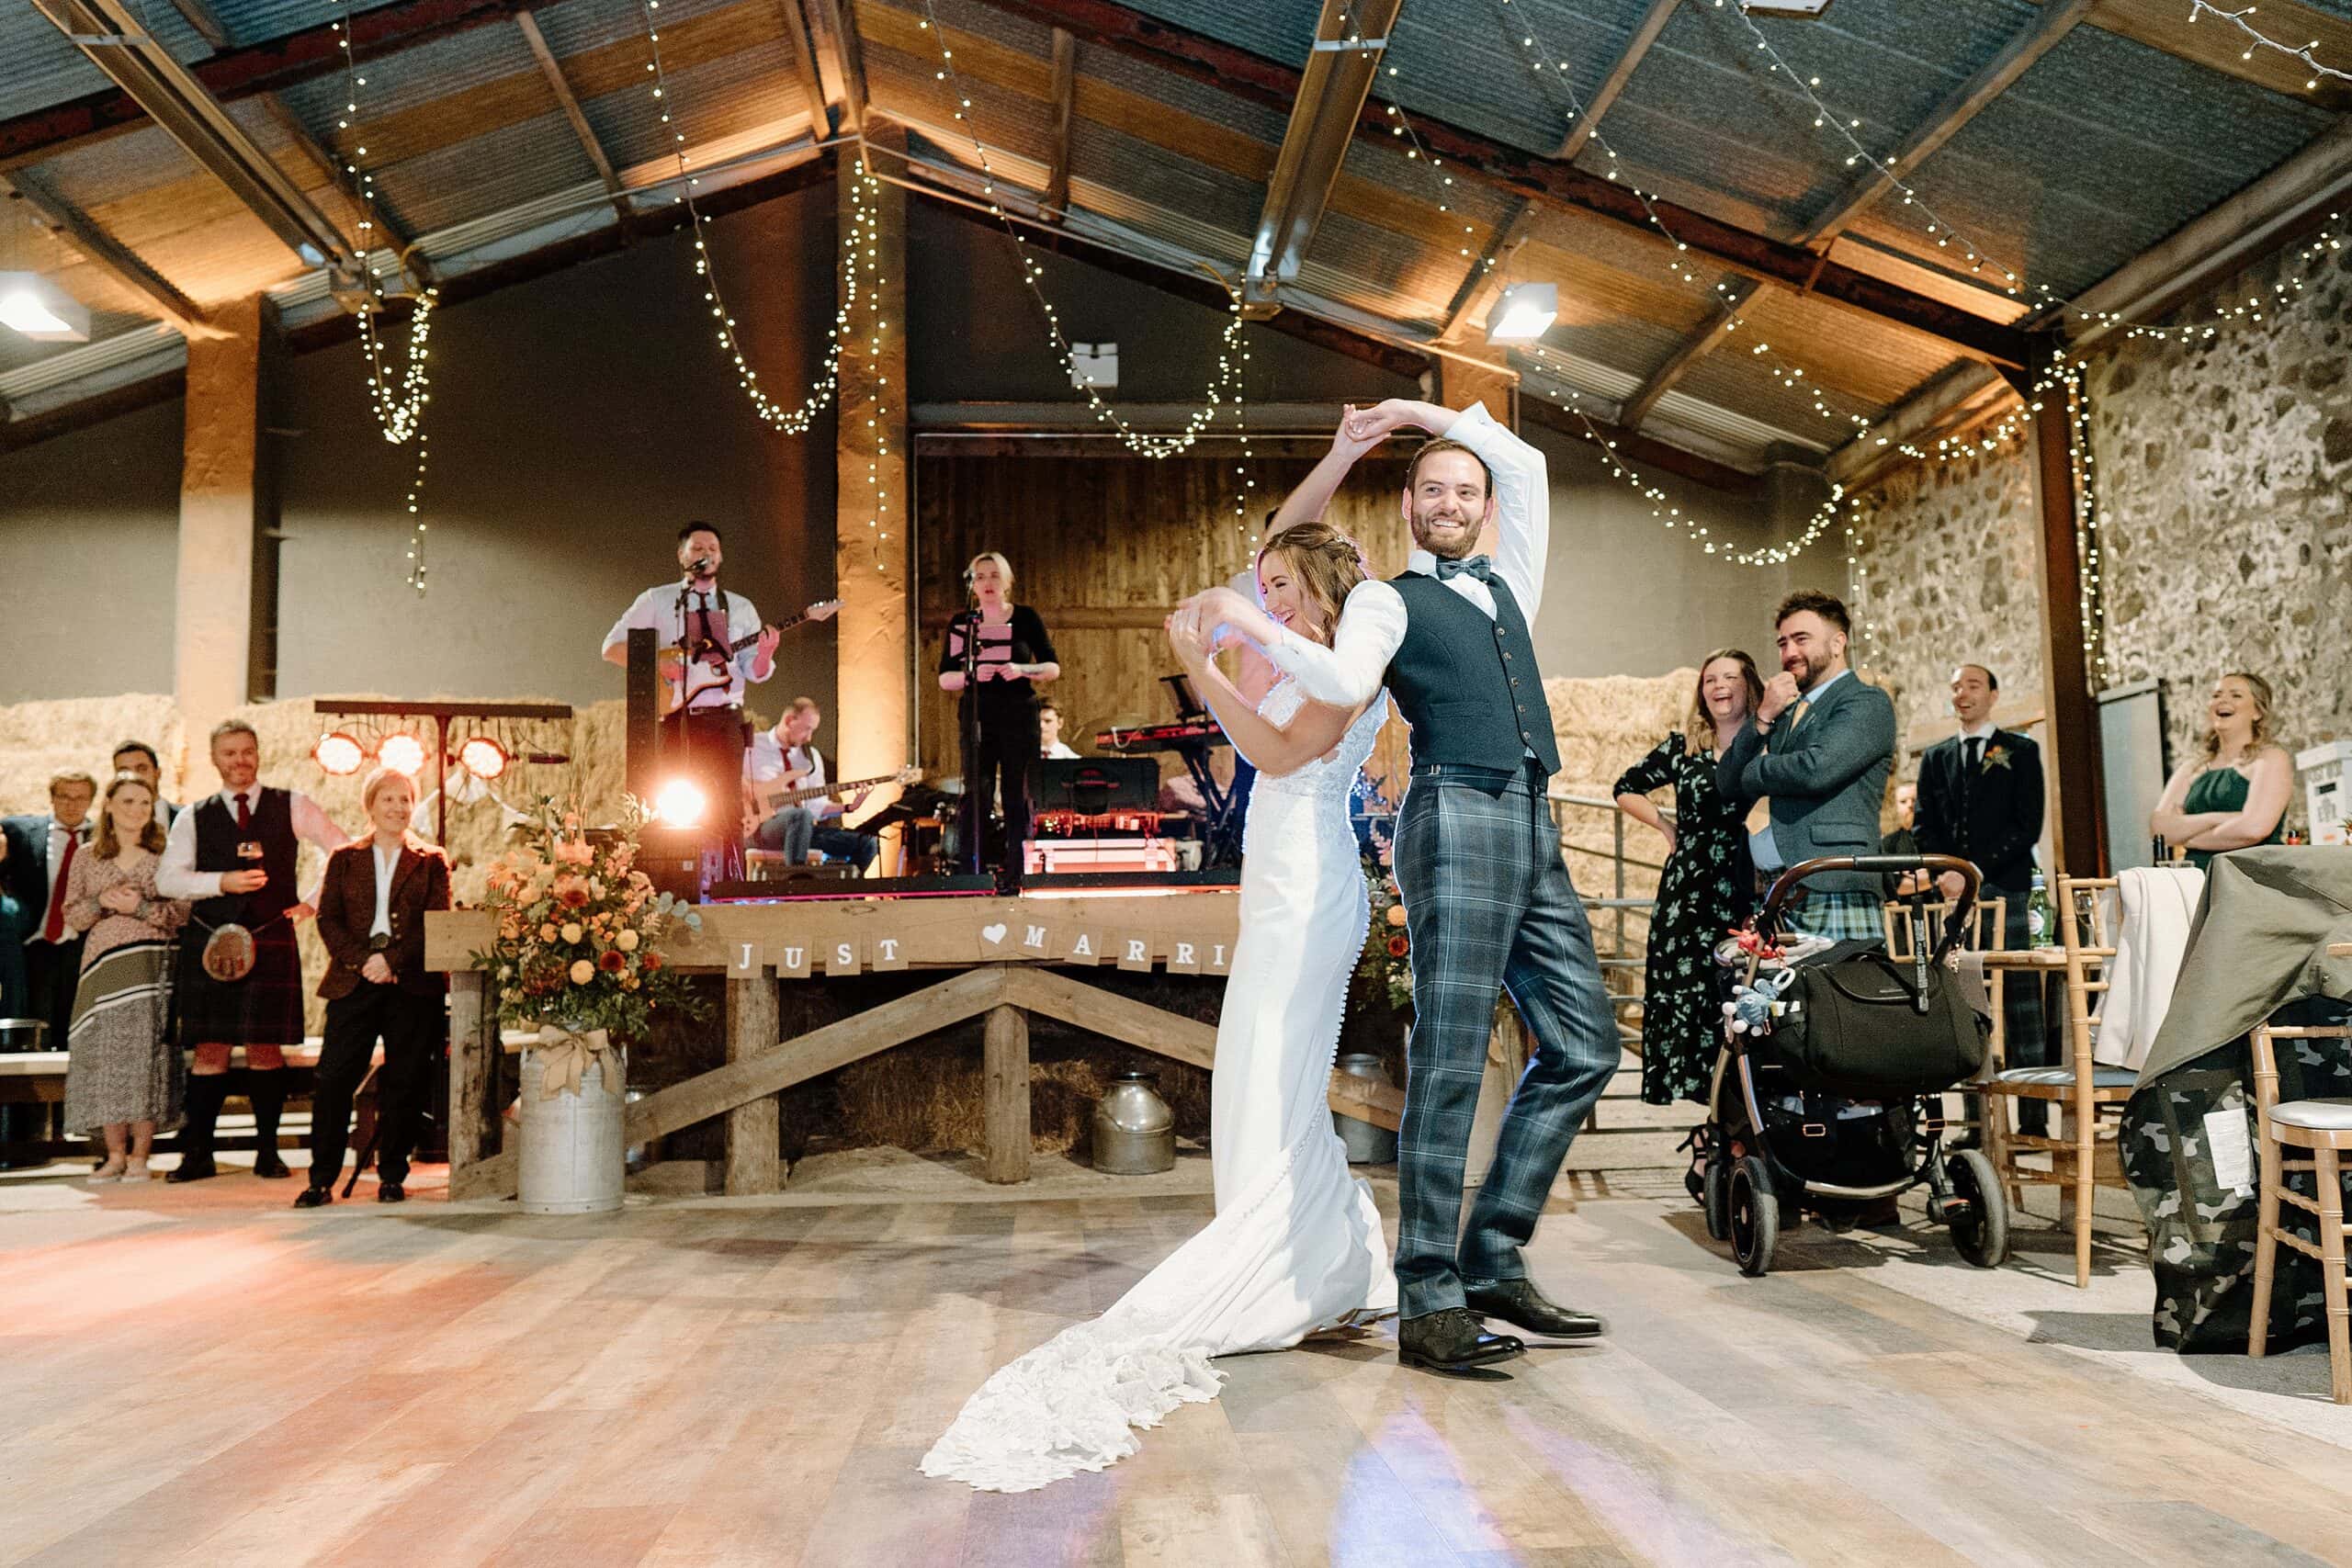 bride and groom in first dance beneath festoon lights as band play in the background in the hay barn at harelaw farm wedding venue fenwick scotland